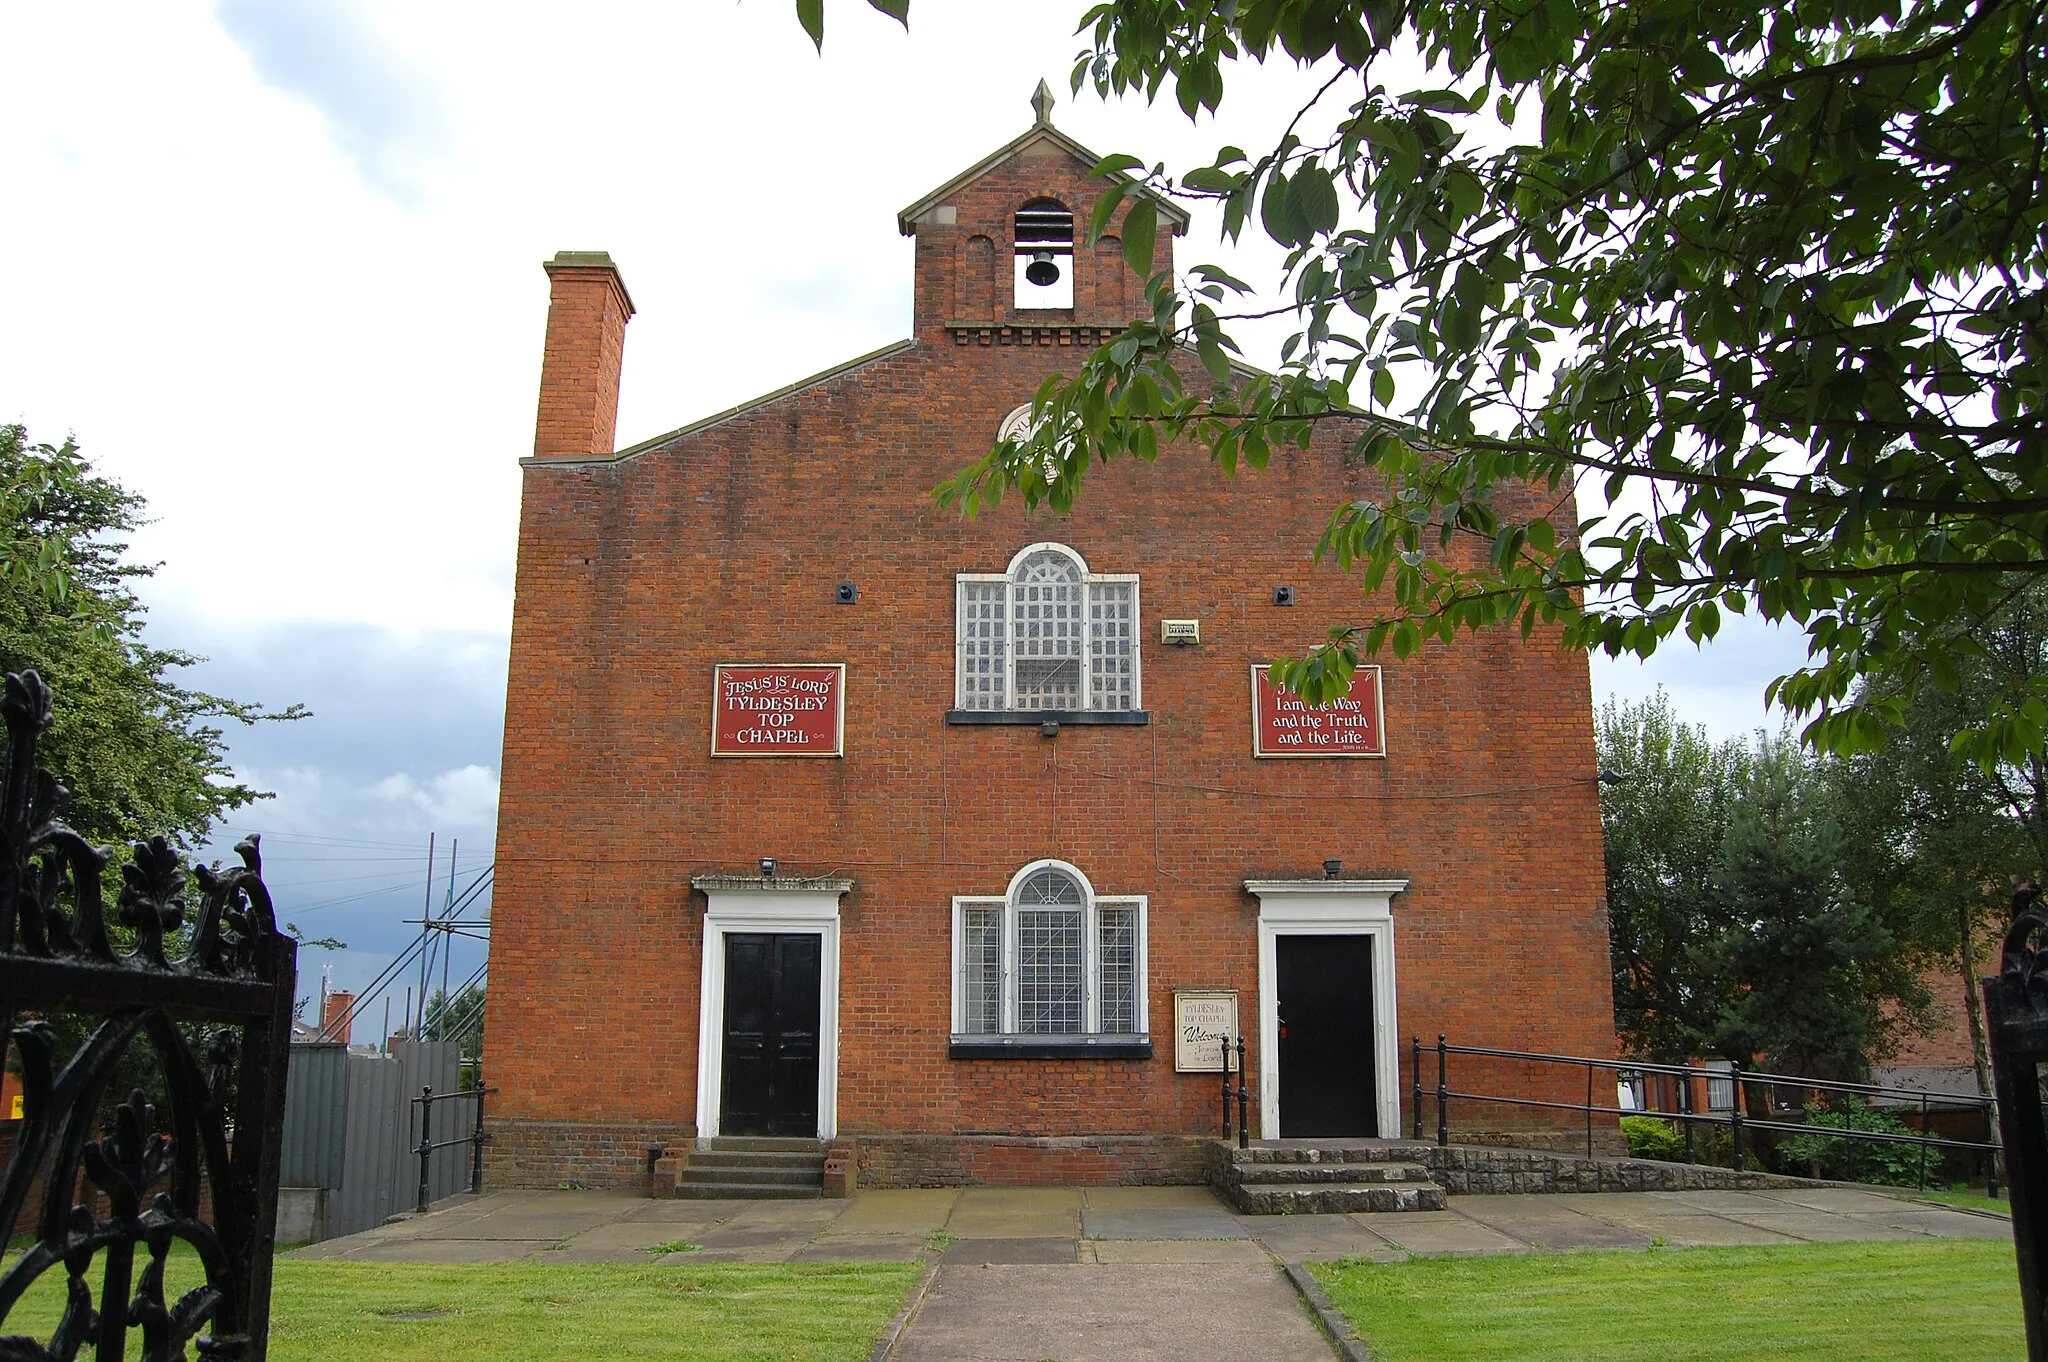 Photo showing: Top Chapel was built in 1798 and was the first place of worship built in Tyldesley, Greater Manchester, England.